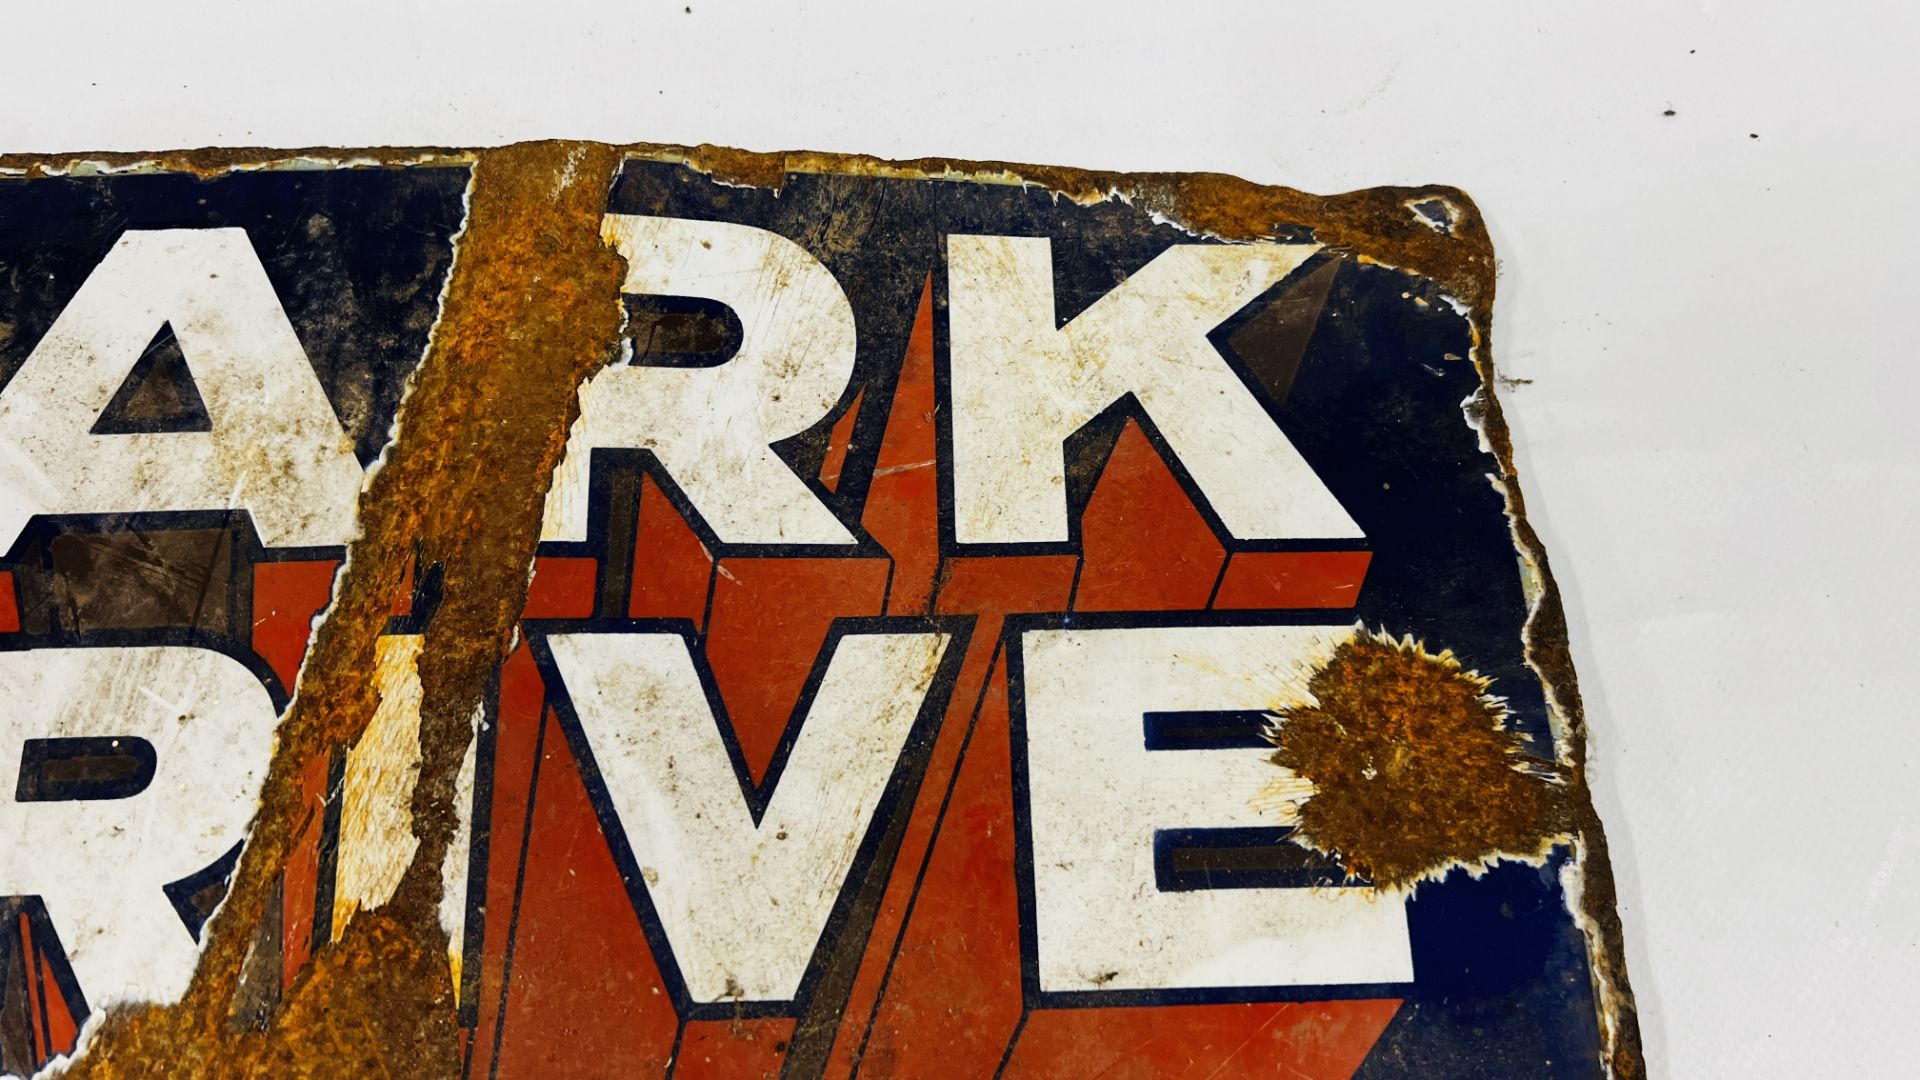 AN ORIGINAL VINTAGE DOUBLE SIDED ENAMEL SIGN "PARK DRIVE" PLAIN & CORK TIPPED (SIGNS OF EXTENSIVE - Image 11 of 13